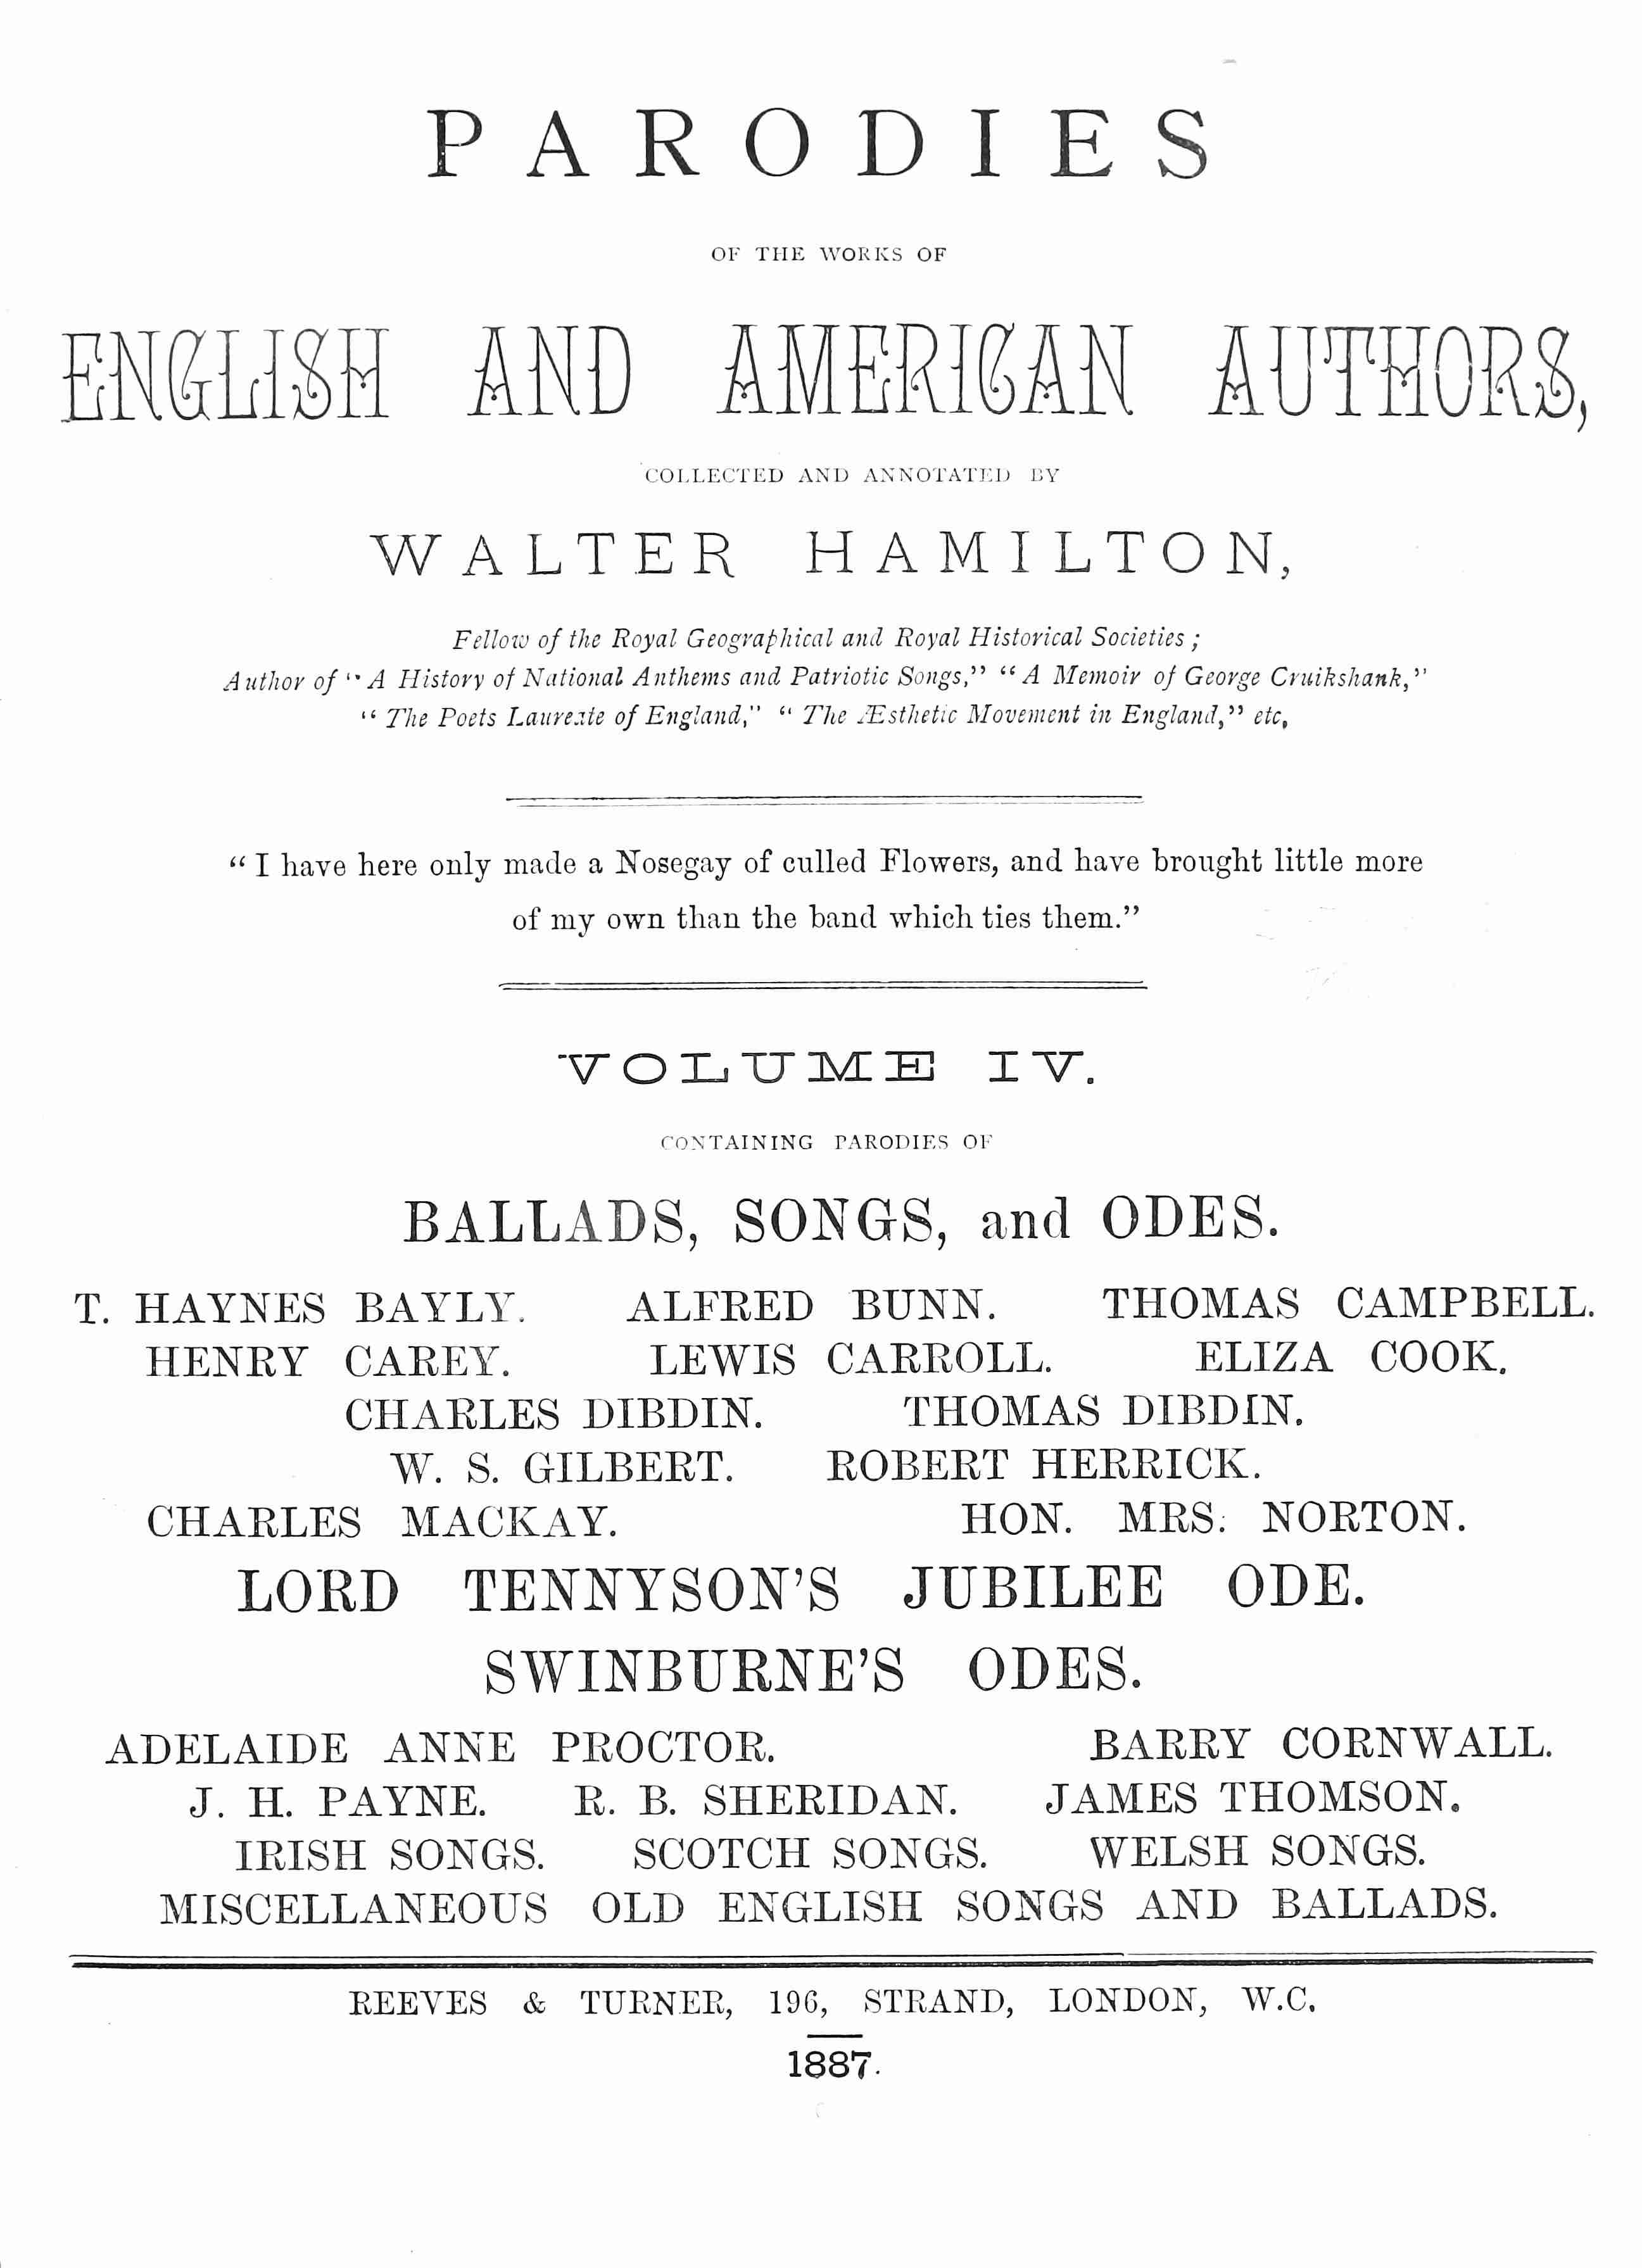 Parodies of the works of English & American authors, vol. IV